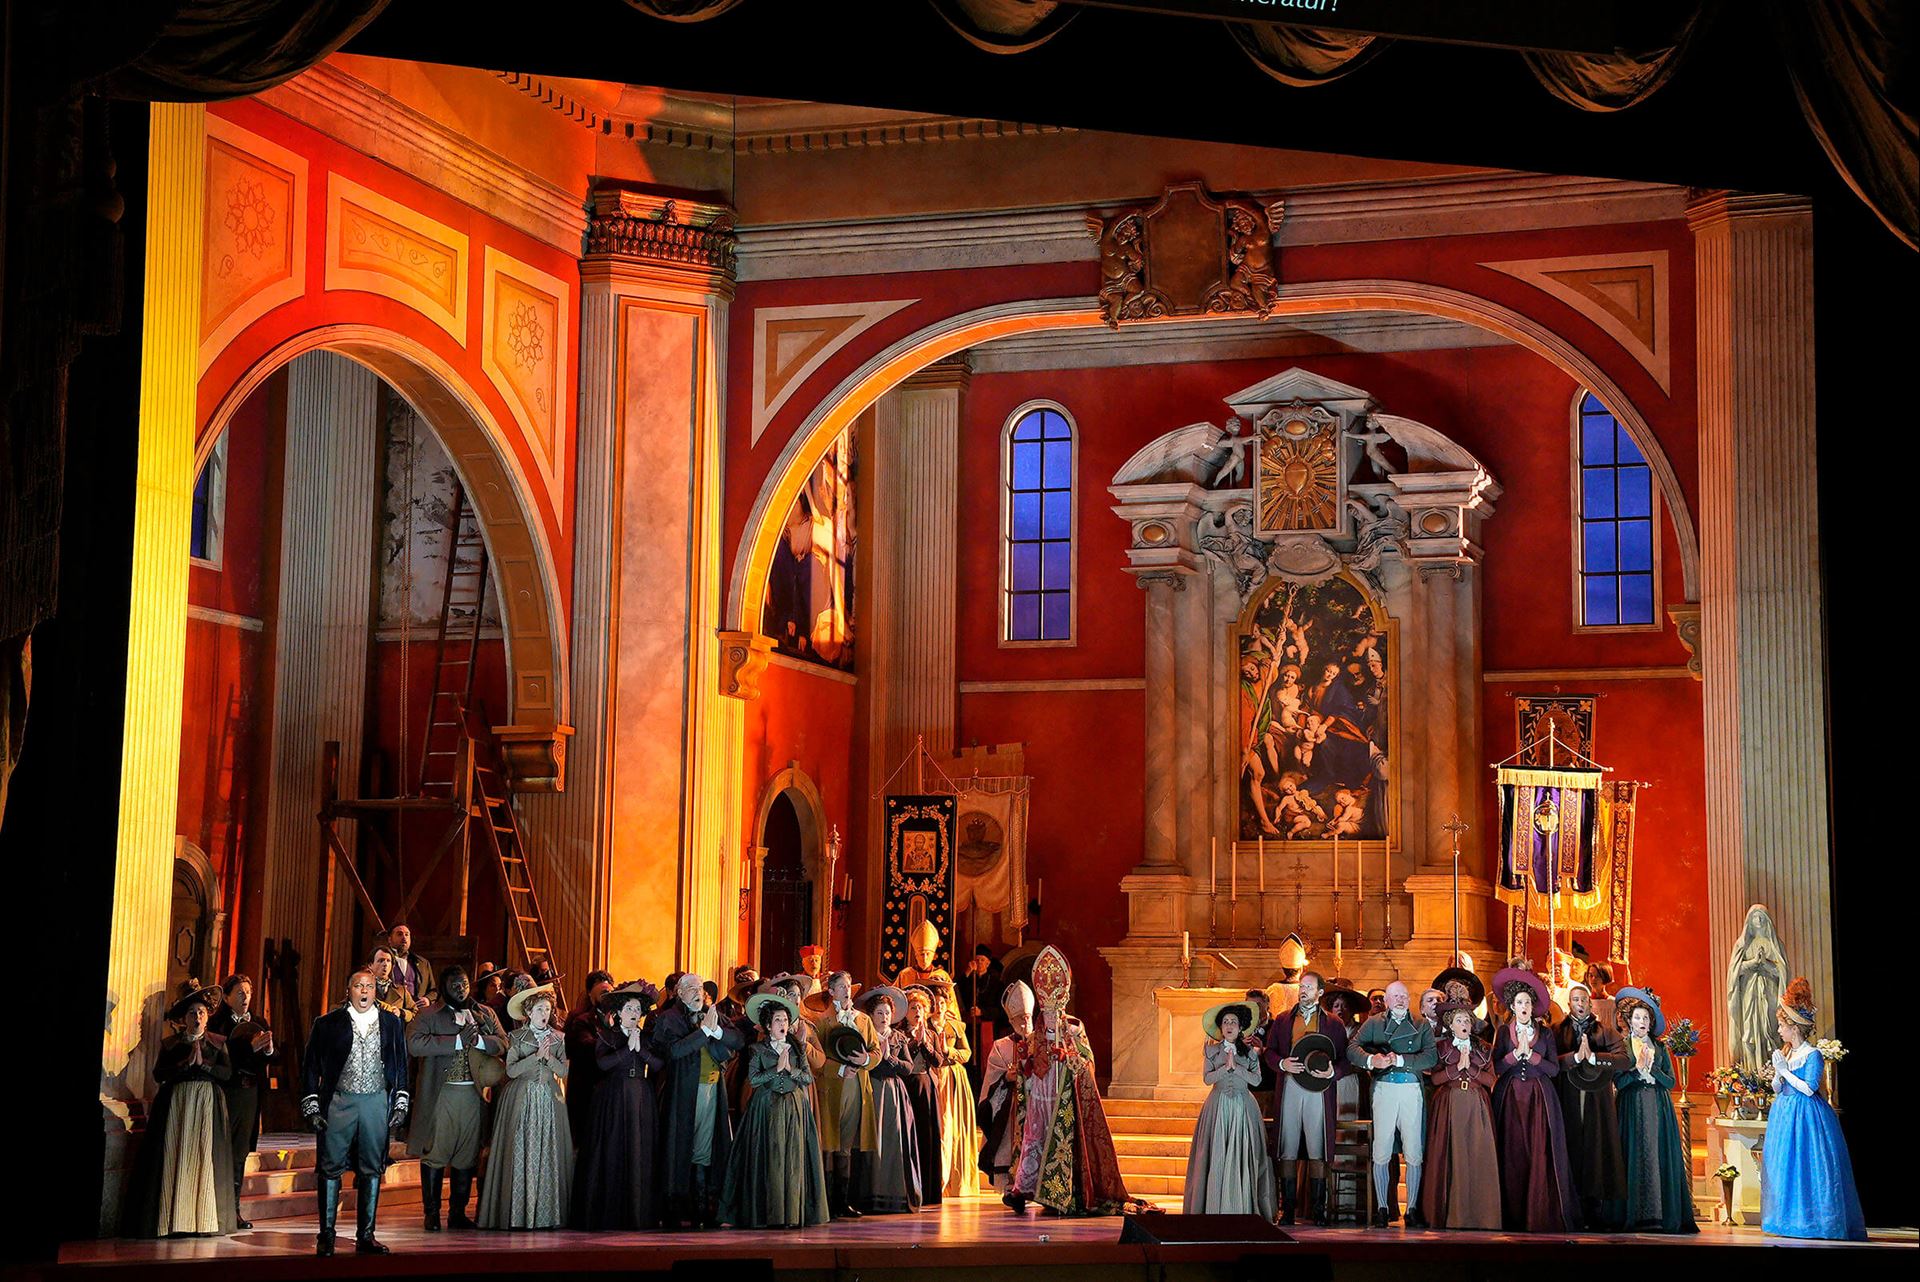 Opera set of a church with cast members on stage